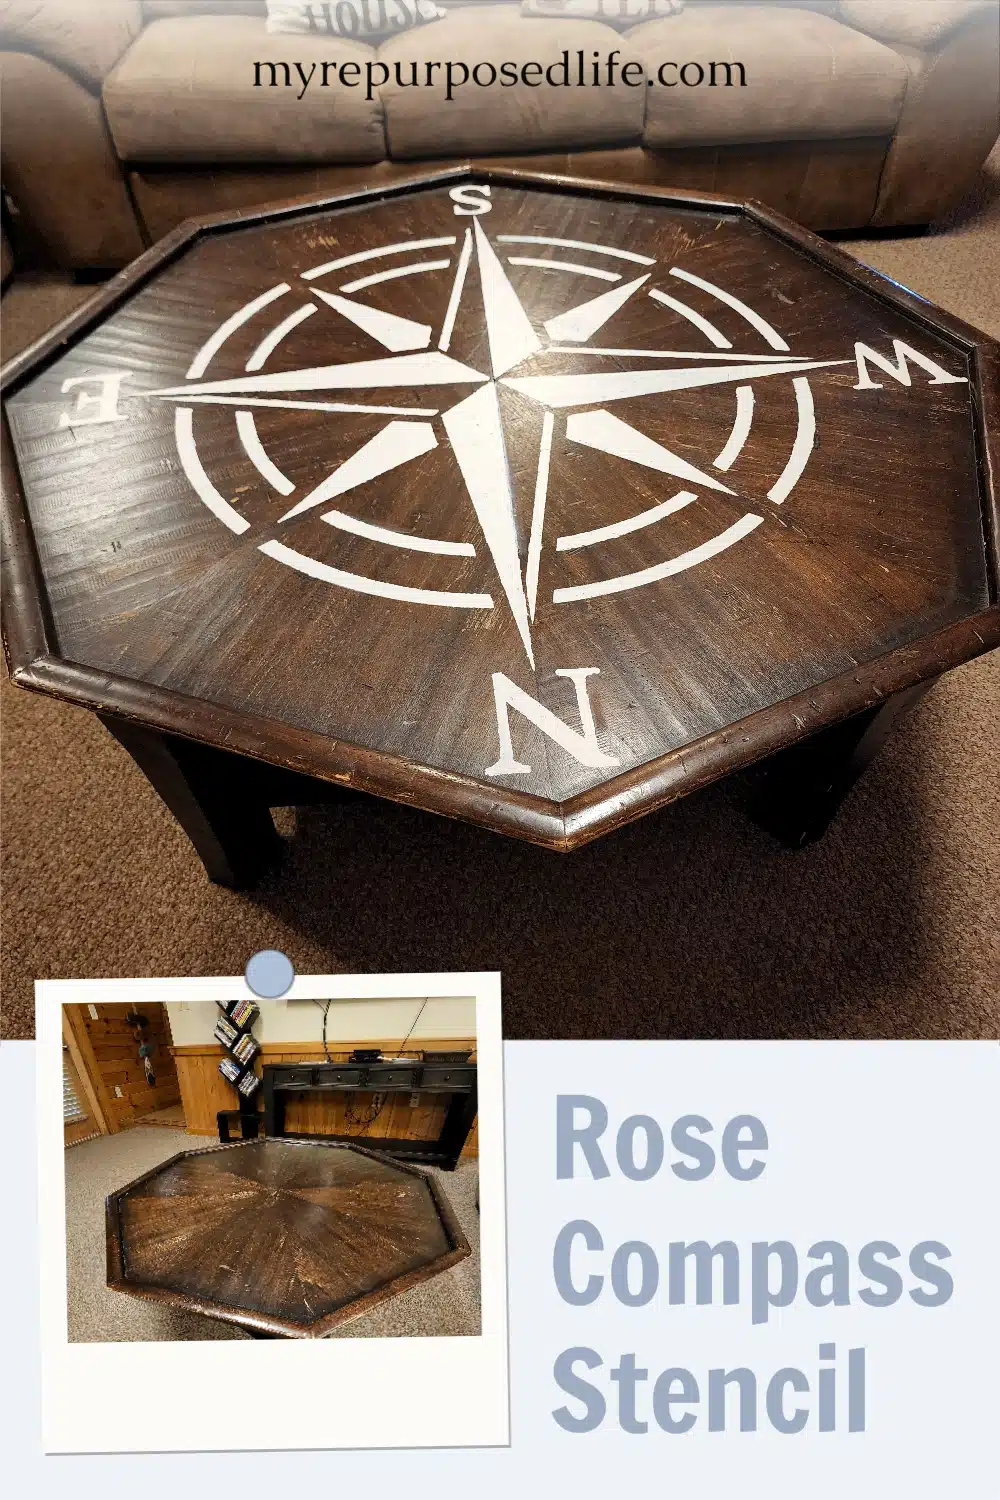 How to use a compass rose stencil to upcycle a used coffee table. Tips for using an extra large stencil under less than ideal circumstances. #MyRepurposedLife via @repurposedlife